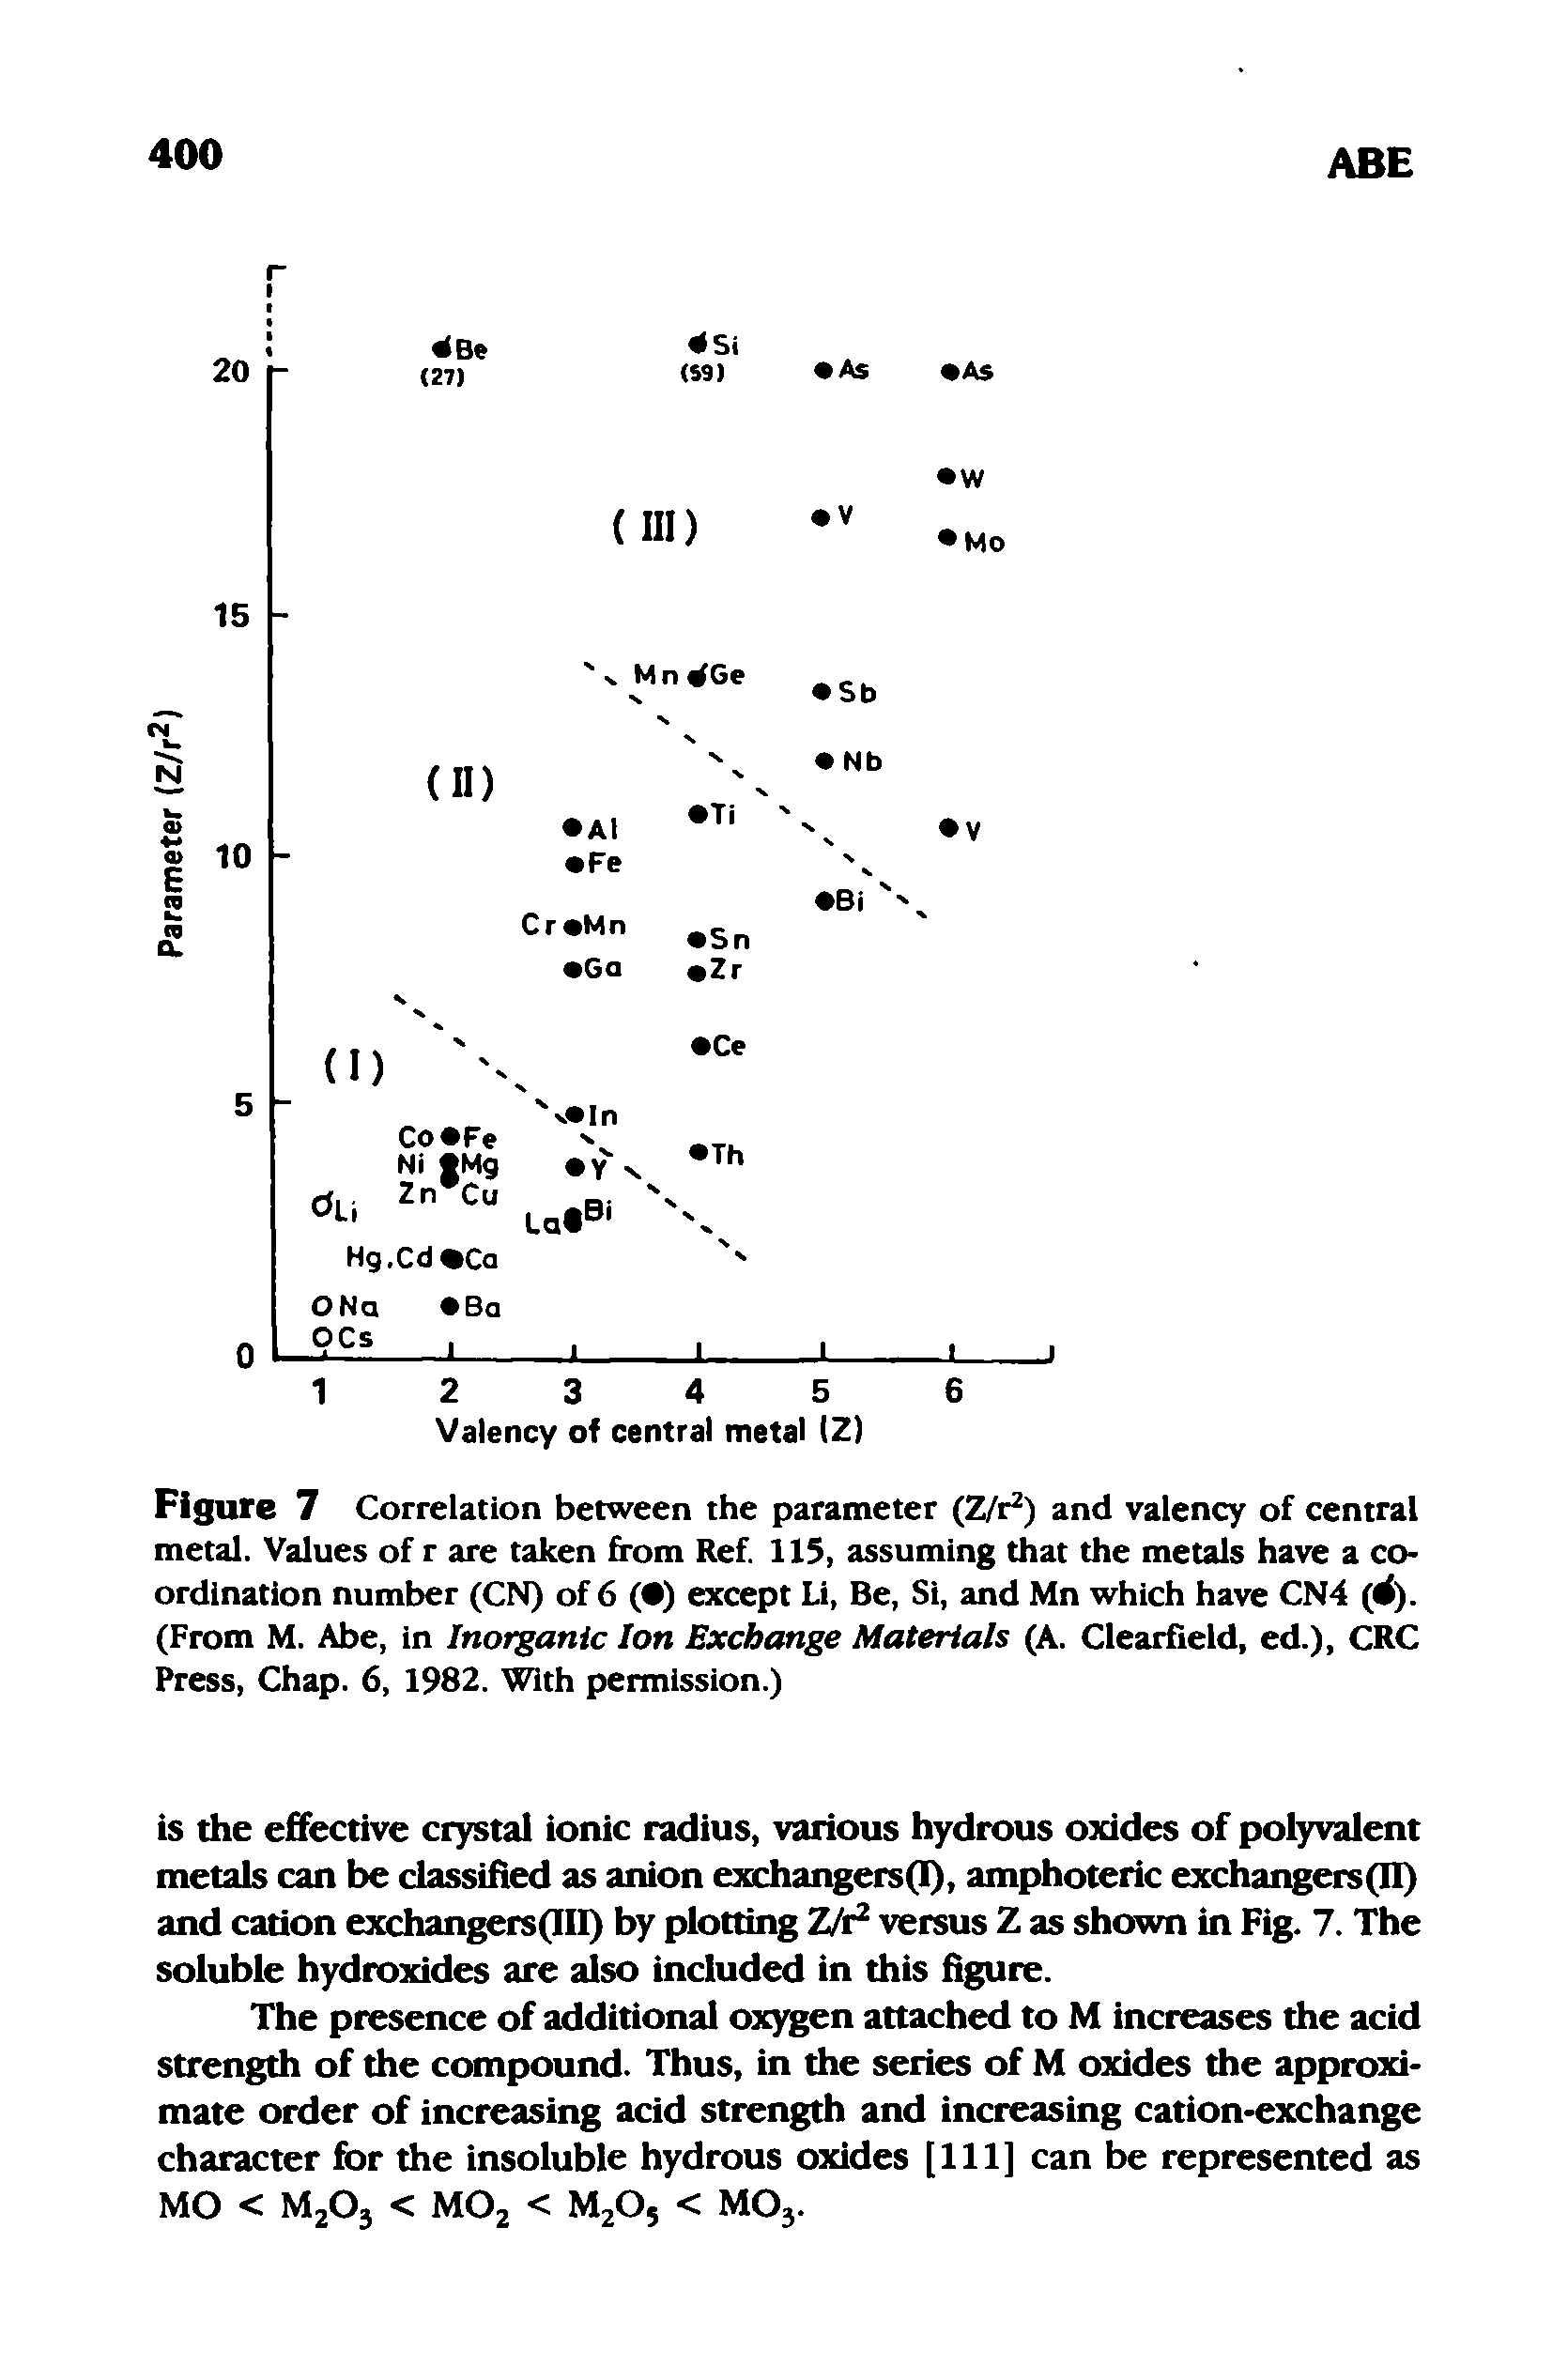 Figure 7 Correlation between the parameter (Z/r ) and valency of central metal. Values of r are taken from Ref 115, assuming that the metals have a coordination number (CN) of 6 ( ) except Li, Be, Si, and Mn which have CN4 (4). (From M. Abe, in Inorganic Ion Exchange Materials (A. Clearfield, ed.), CRC Press, Chap. 6, 1982. With permission.)...